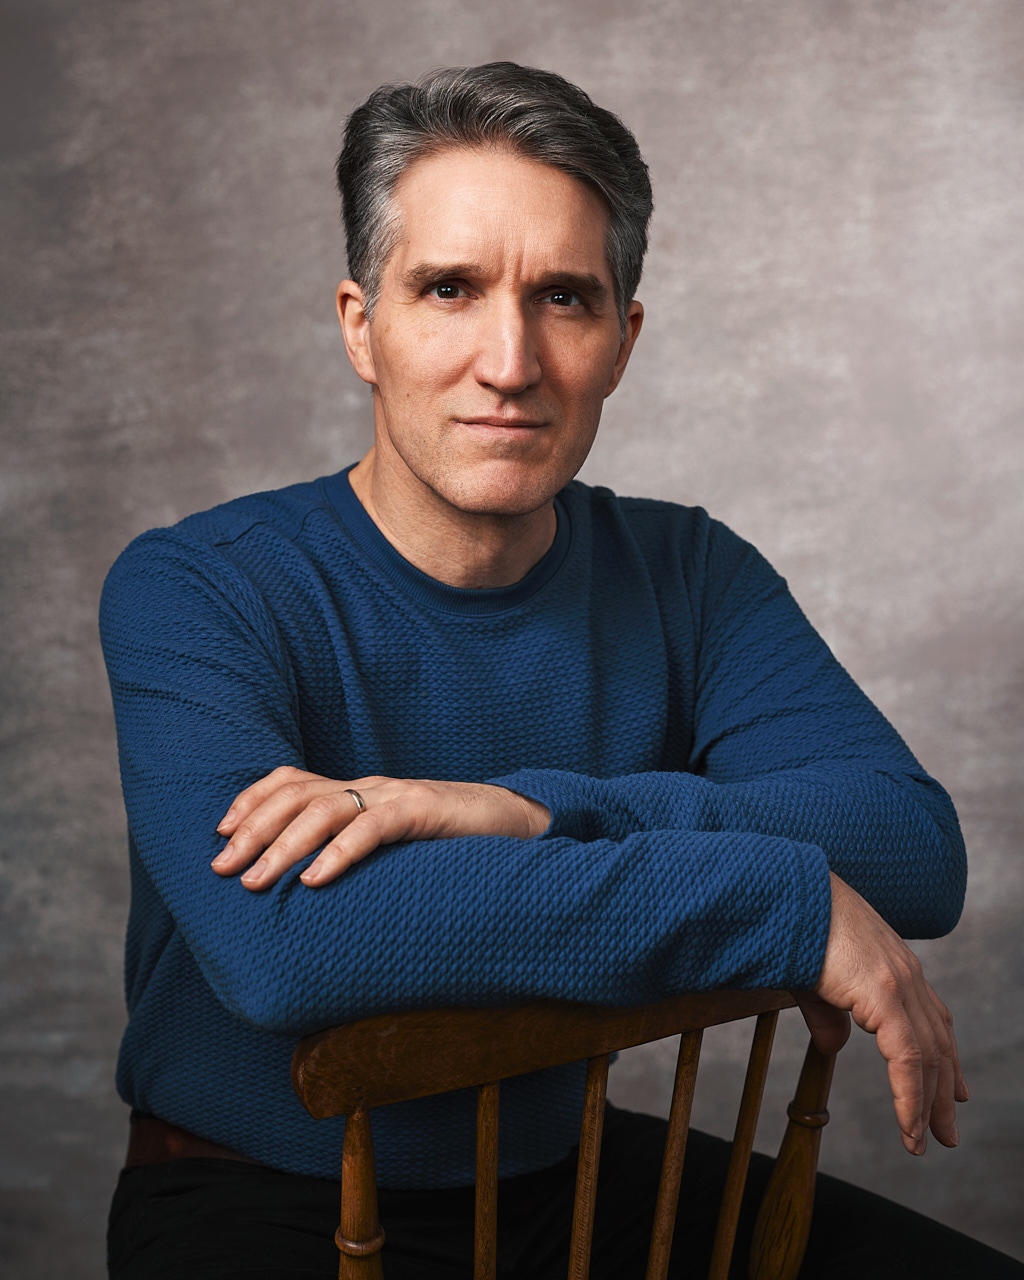 A creative business portrait of a man wearing a blue sweater, sitting on a chair.